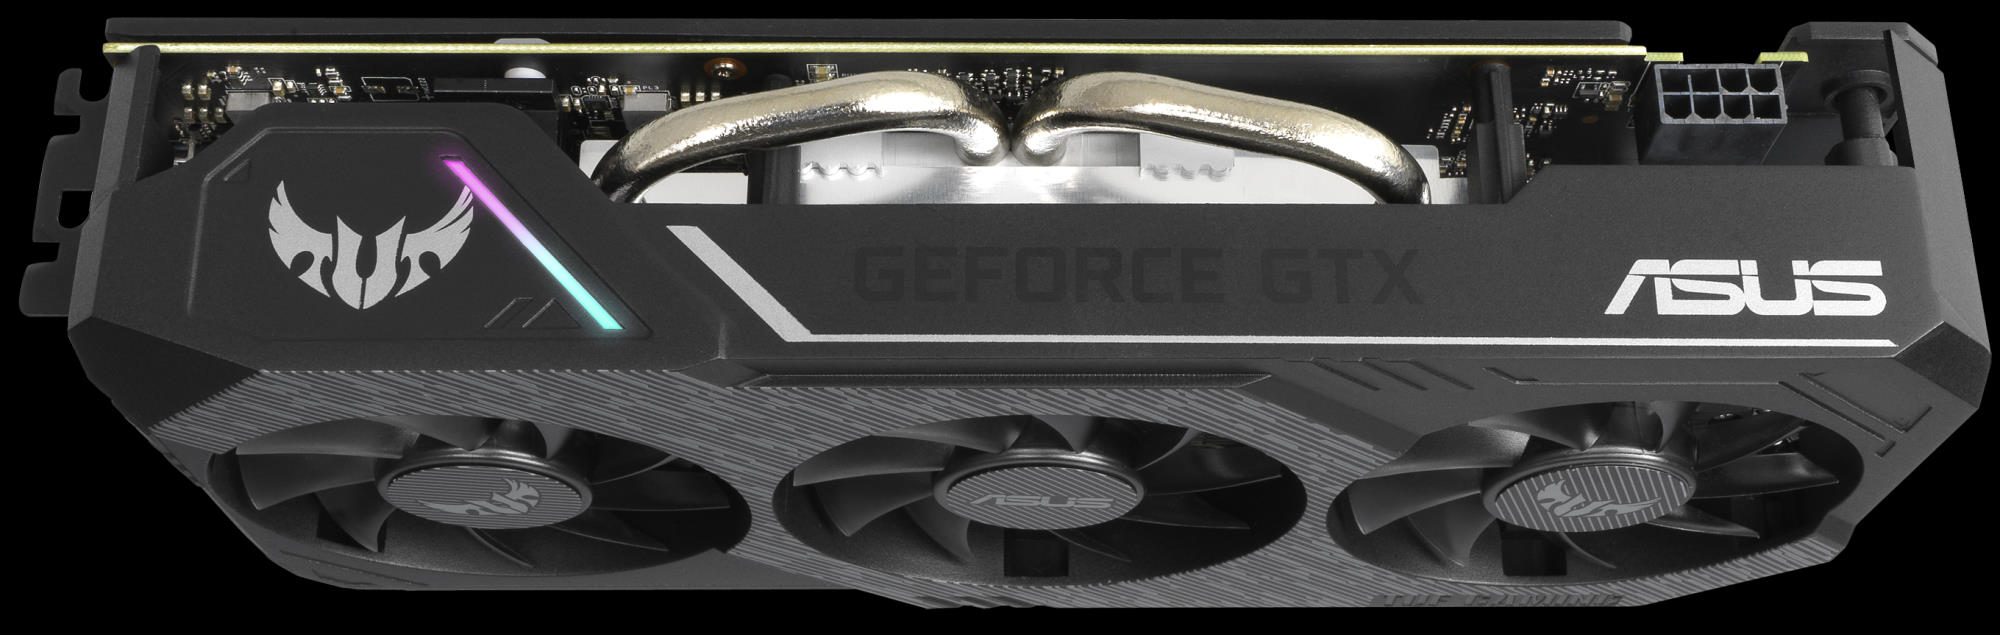 Introducing GeForce GTX 1660 and 1650 SUPER GPUs, and New Gaming Features  For All GeForce Gamers